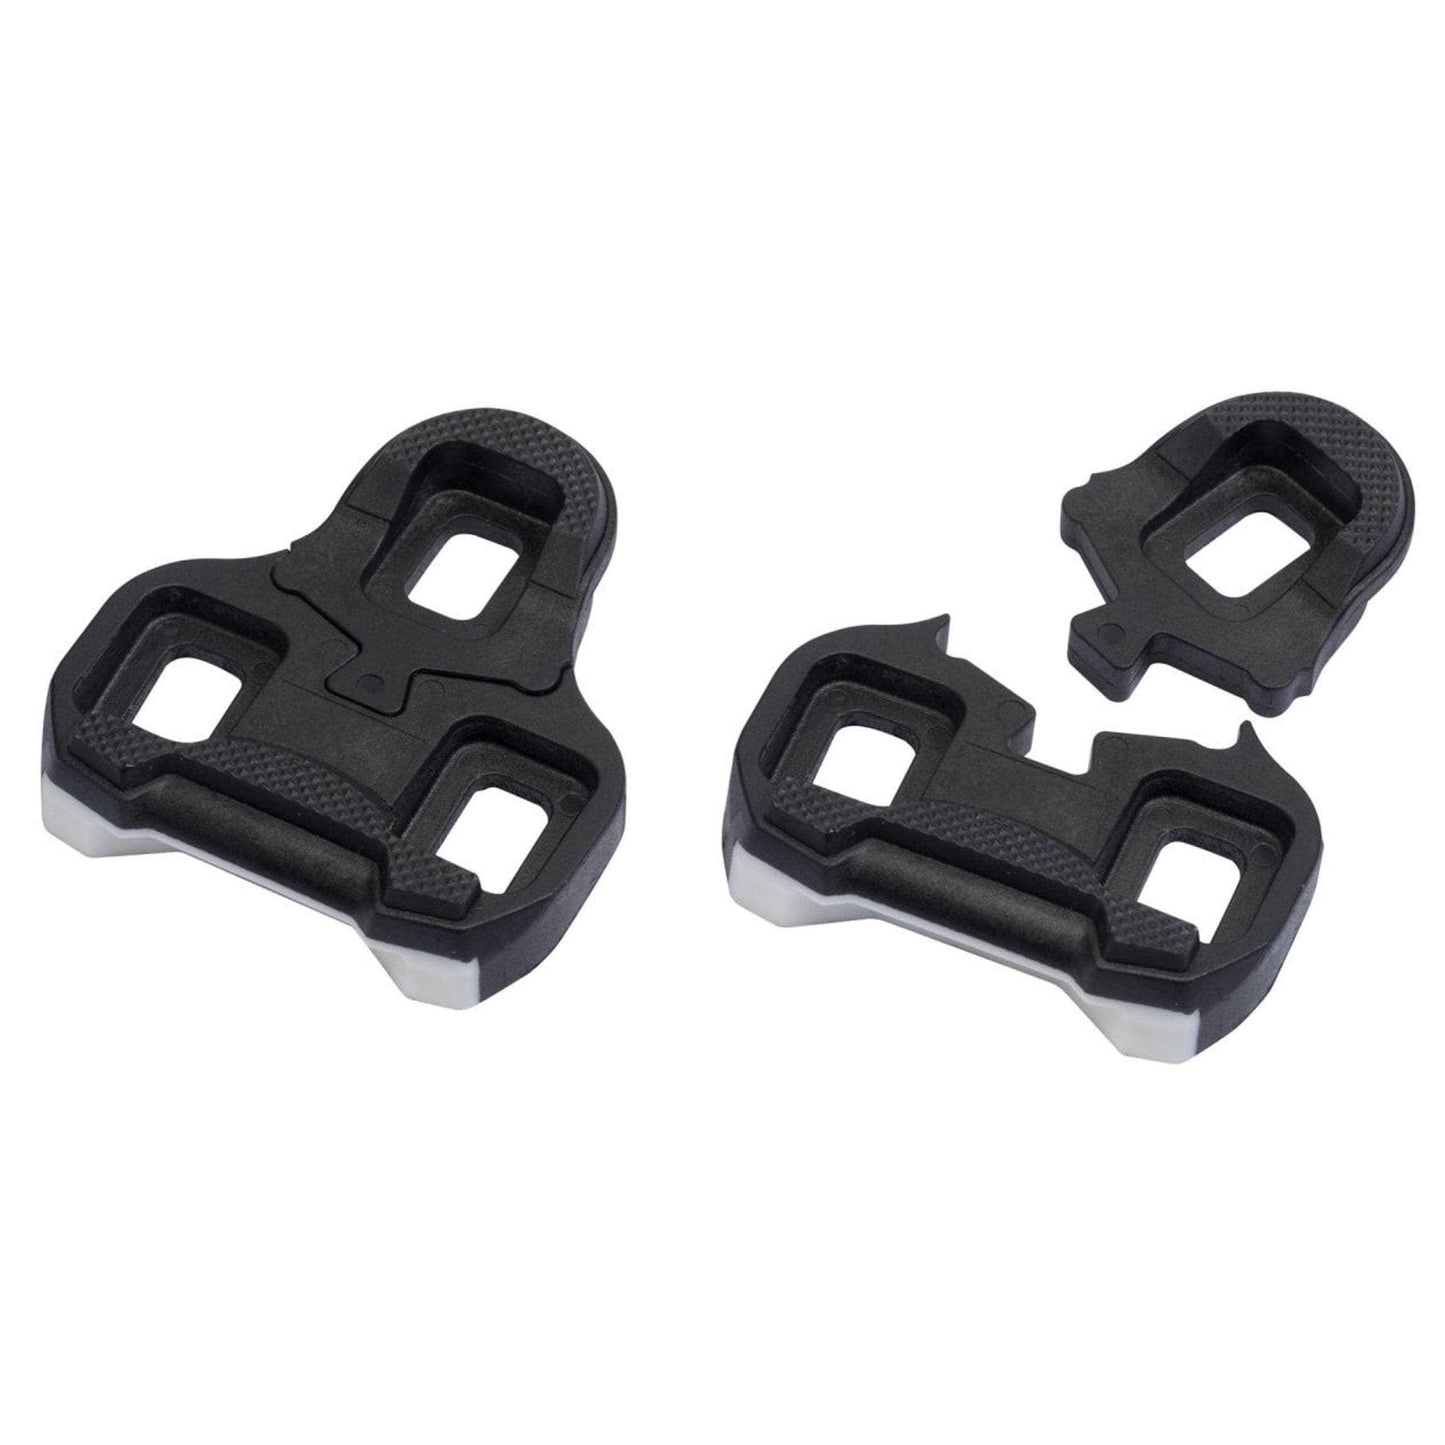 Giant Pedal Cleats 0 Deg LOOK System Compatible